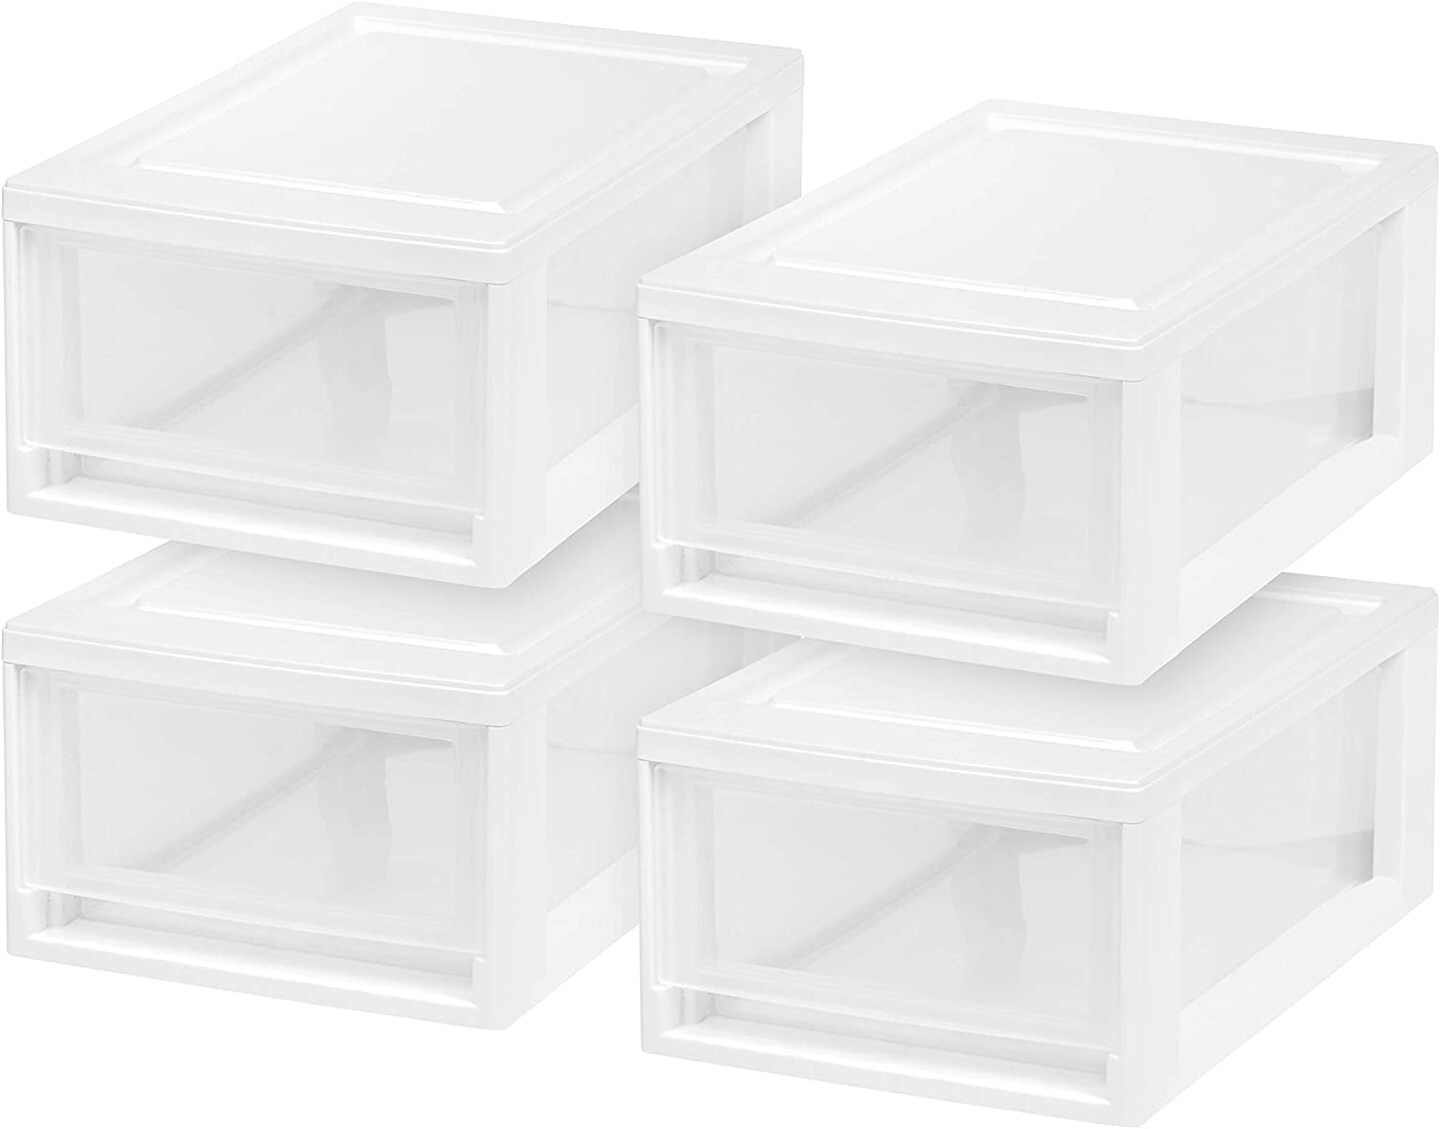 IRIS USA 4 Pack 6qt Plastic Compact Stackable Storage Drawers, Black/White